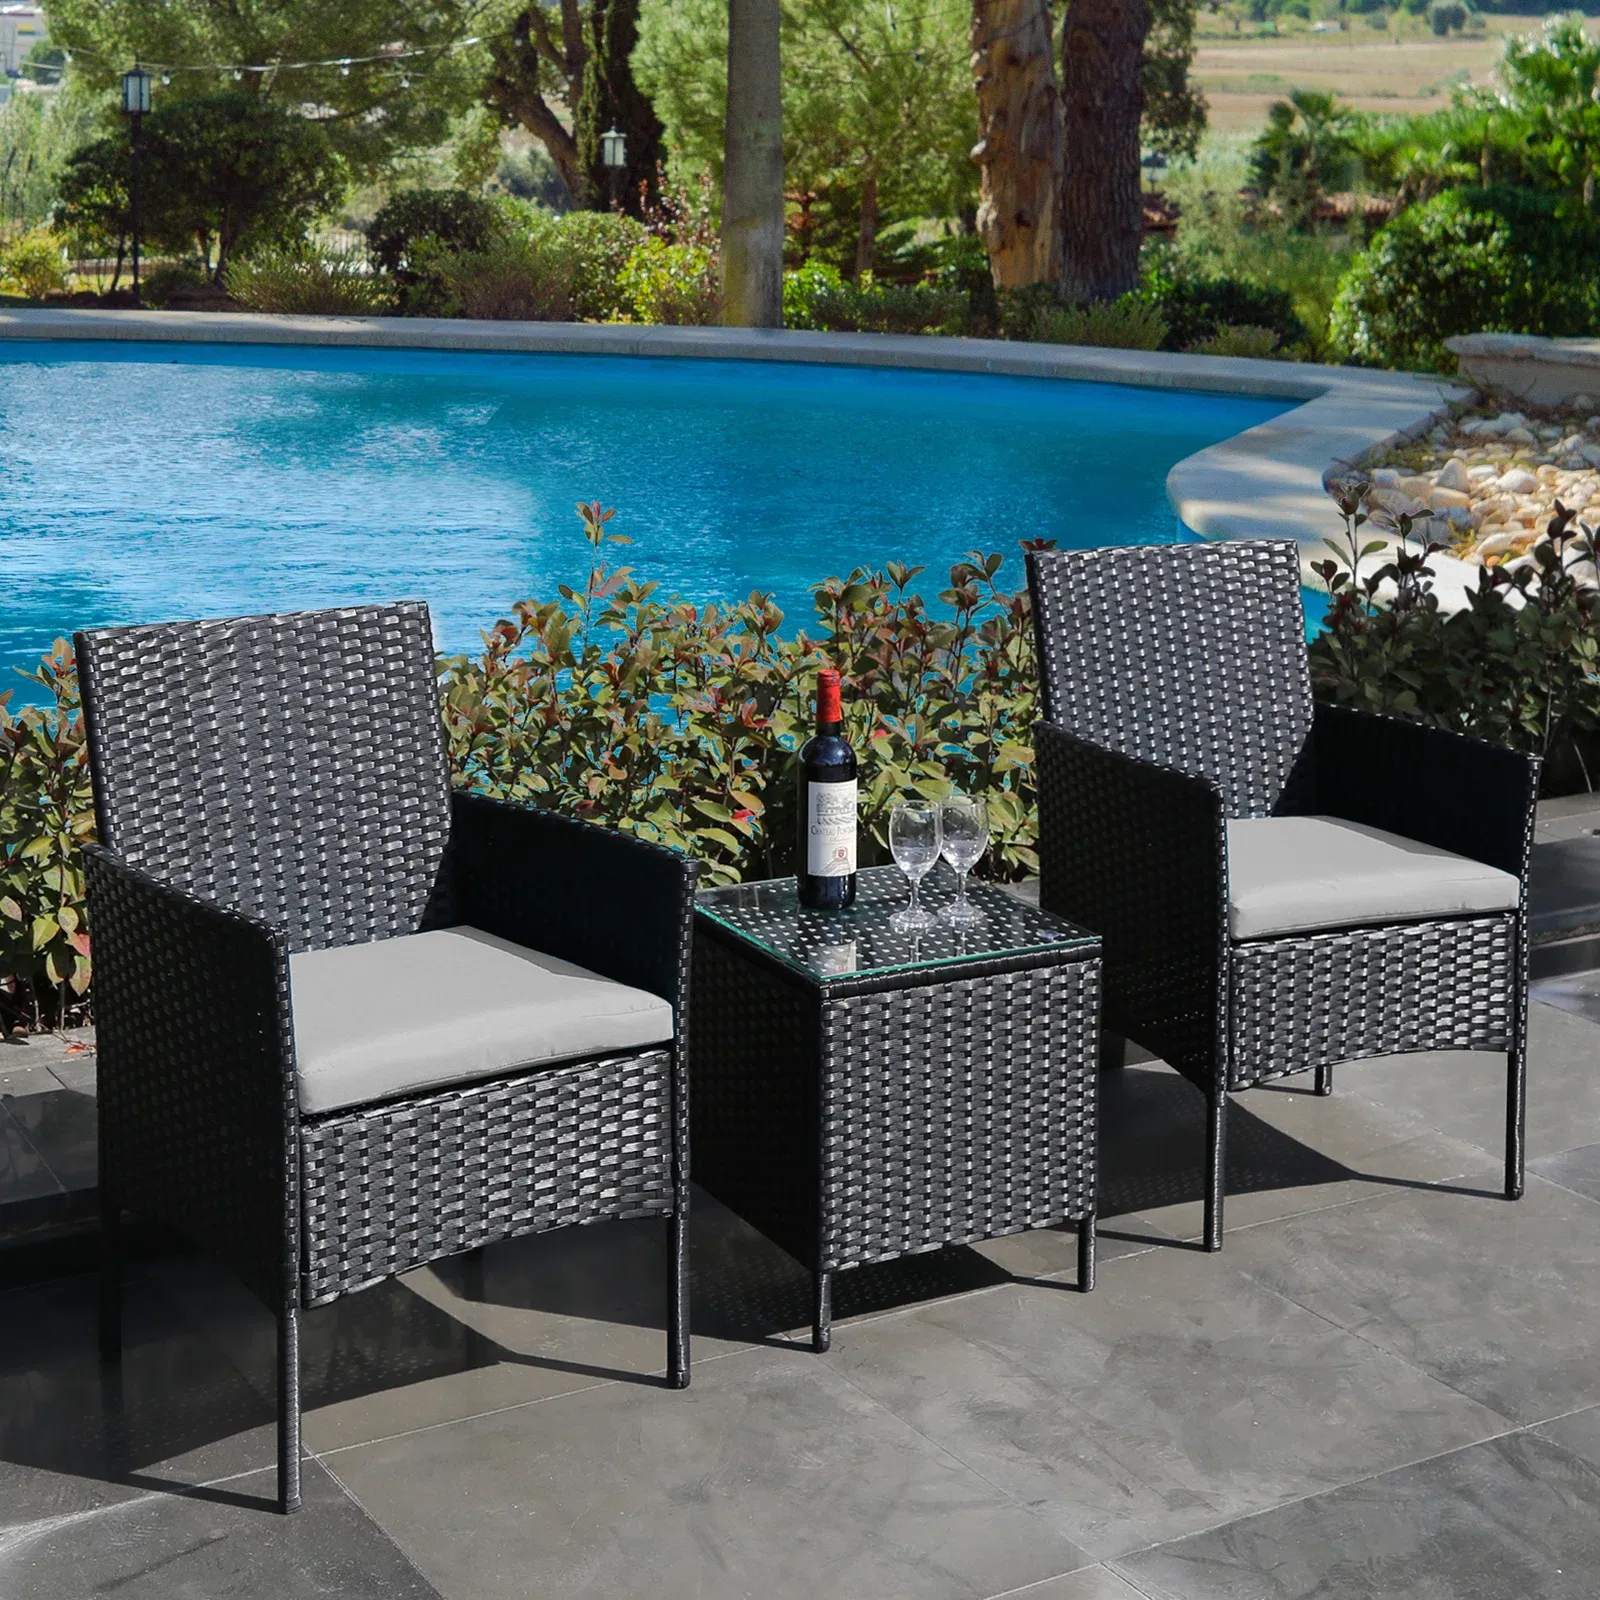 Three-piece outdoor furniture set with two wicker chairs and a matching side table, accompanied by a bottle of wine and two glasses.